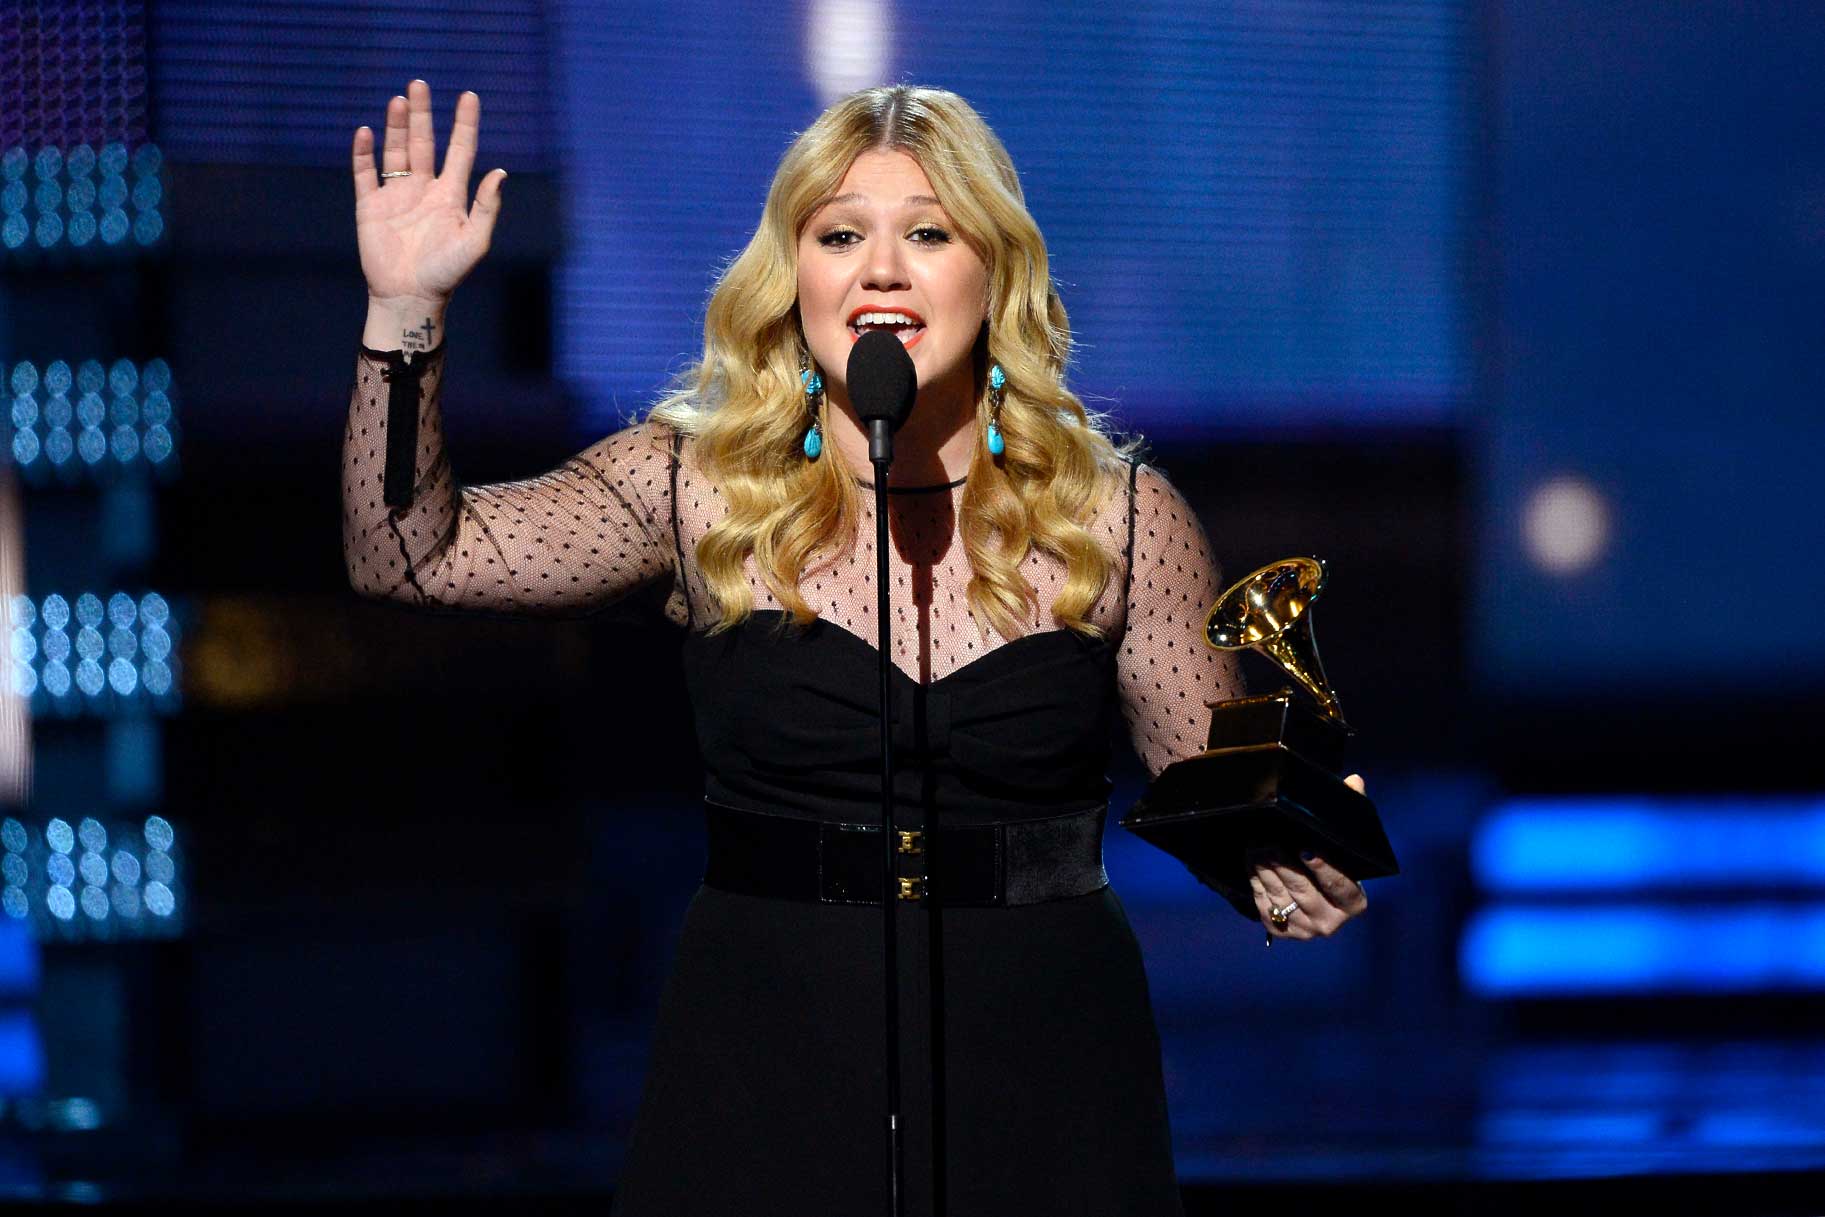 Kelly Clarkson talking on stage at the 55th Annual Grammy Awards.